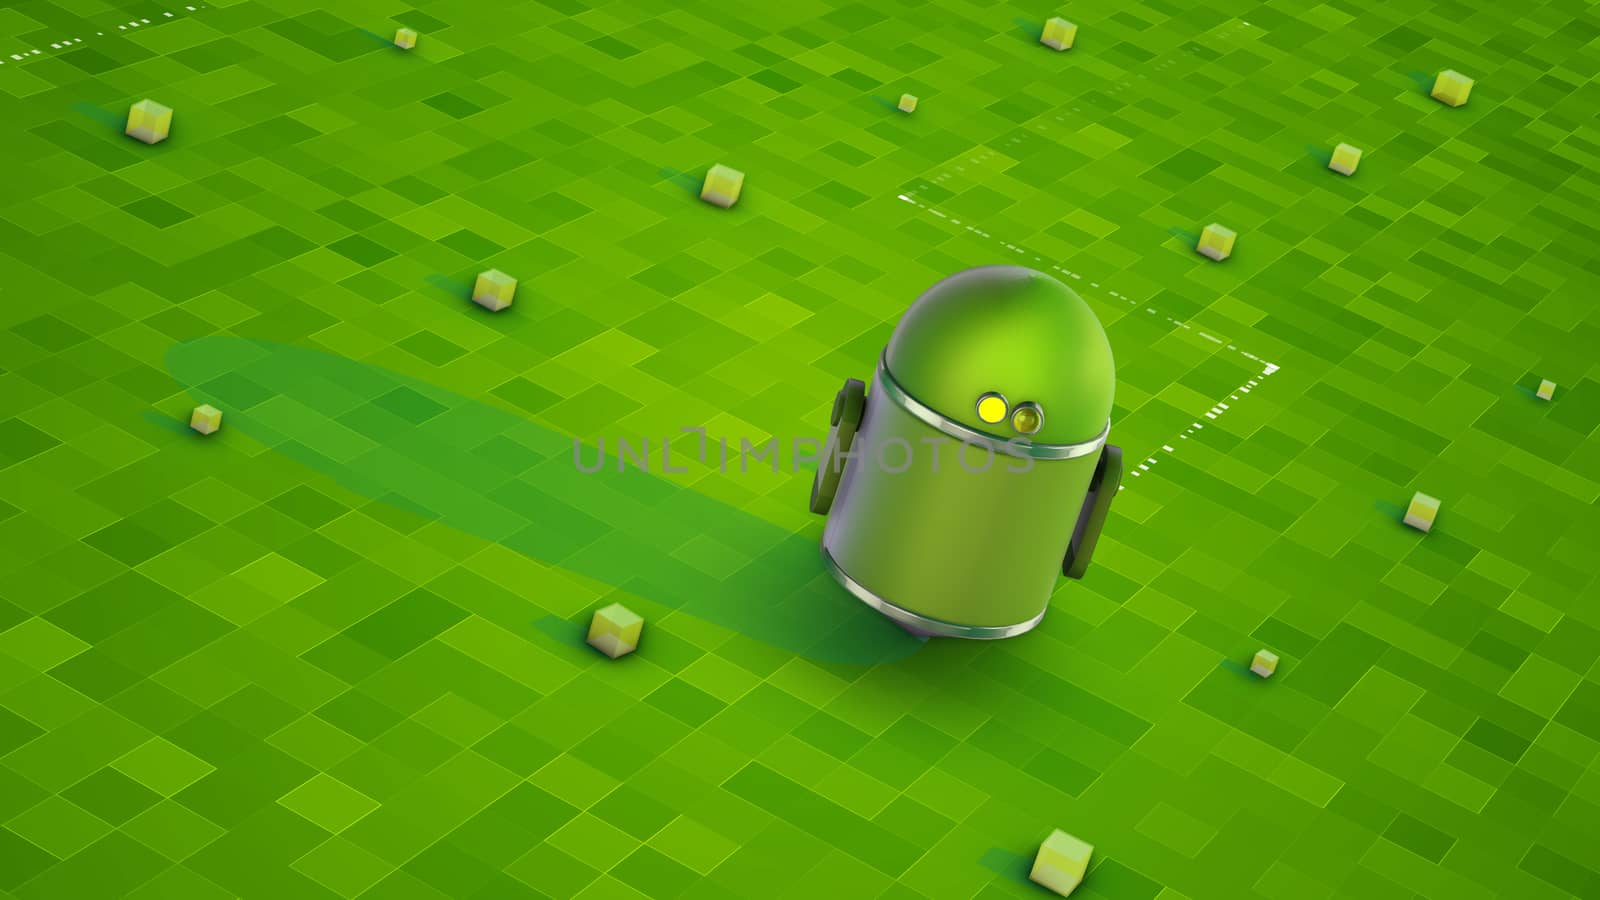 Funny 3d illustration of one globular droid with yellow windows and triangular hands standing on the light green medley floor with square indicators